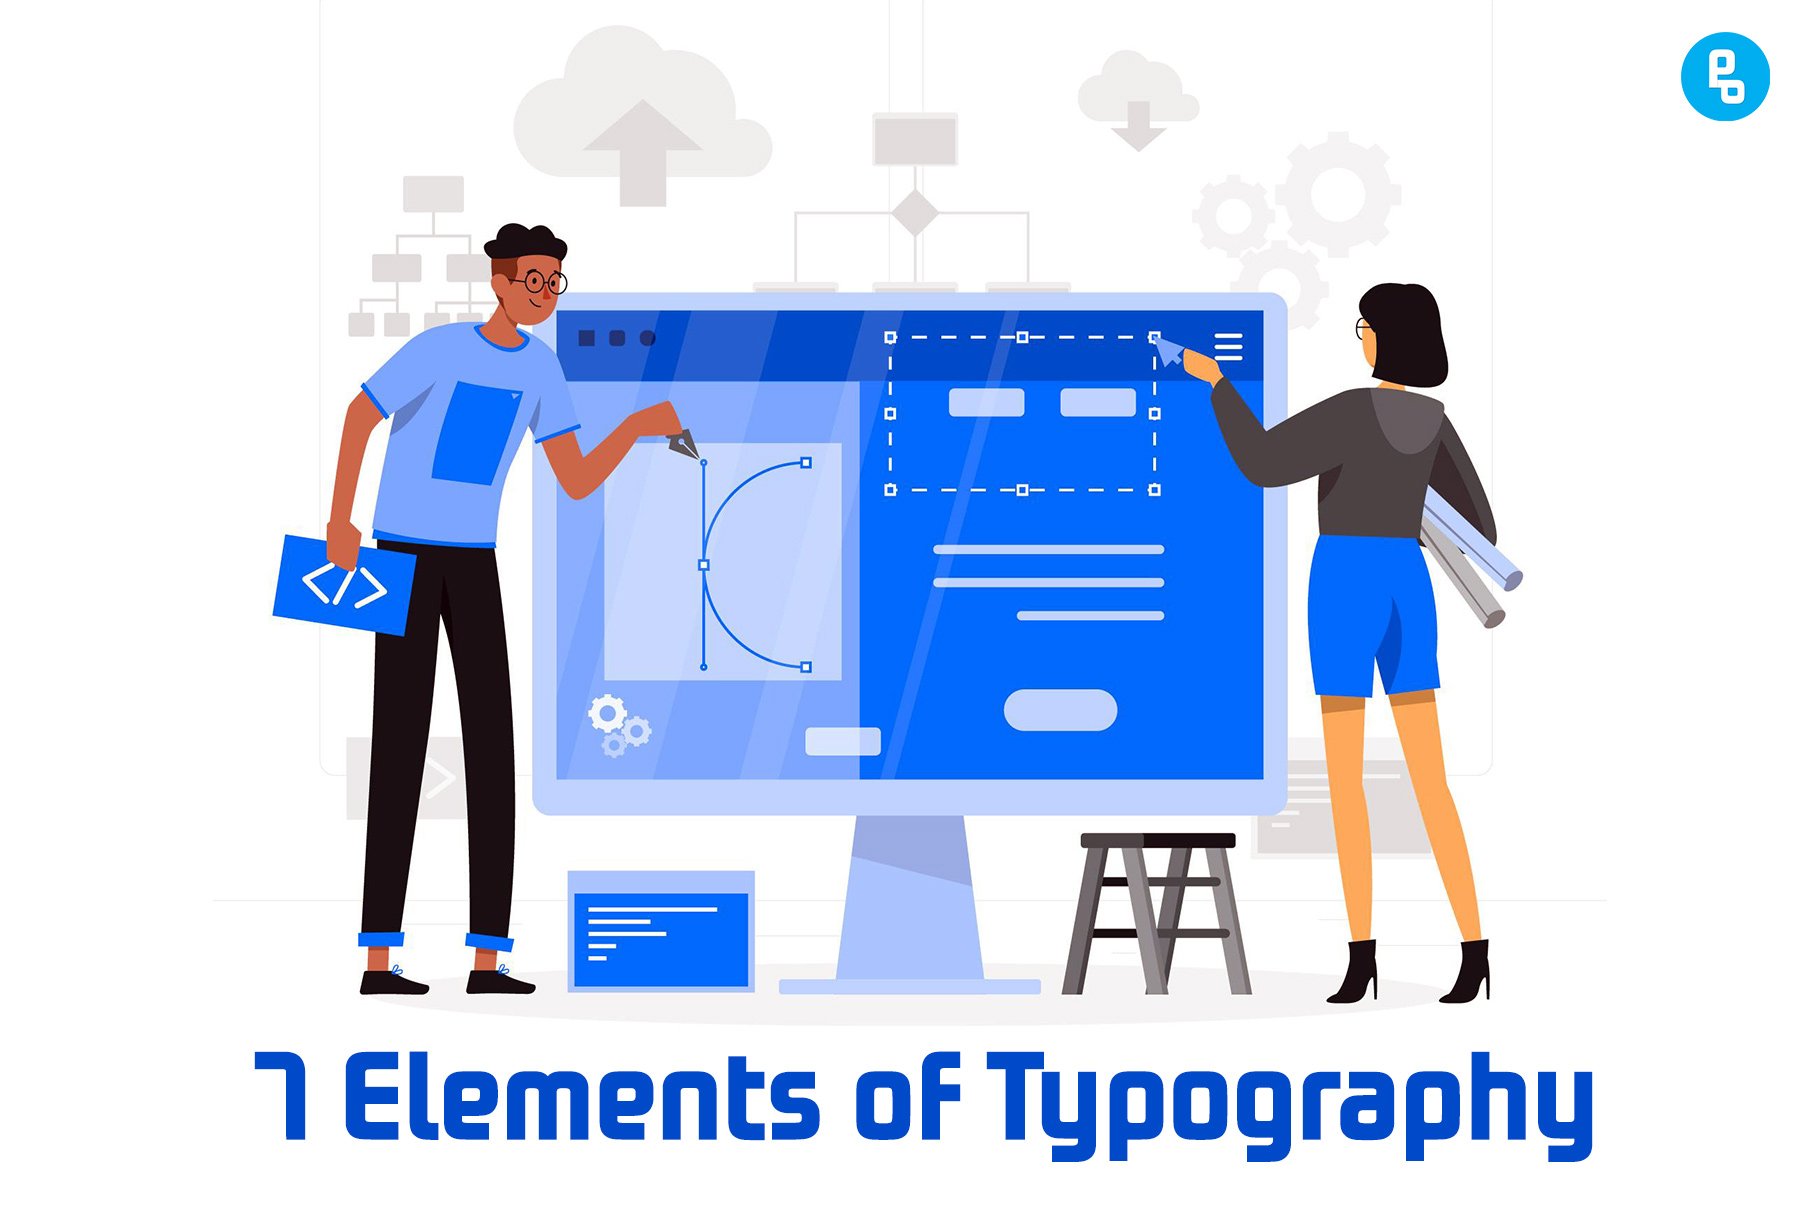 In this article, we are going to discuss 7 essential elements of typography every designer must know about: